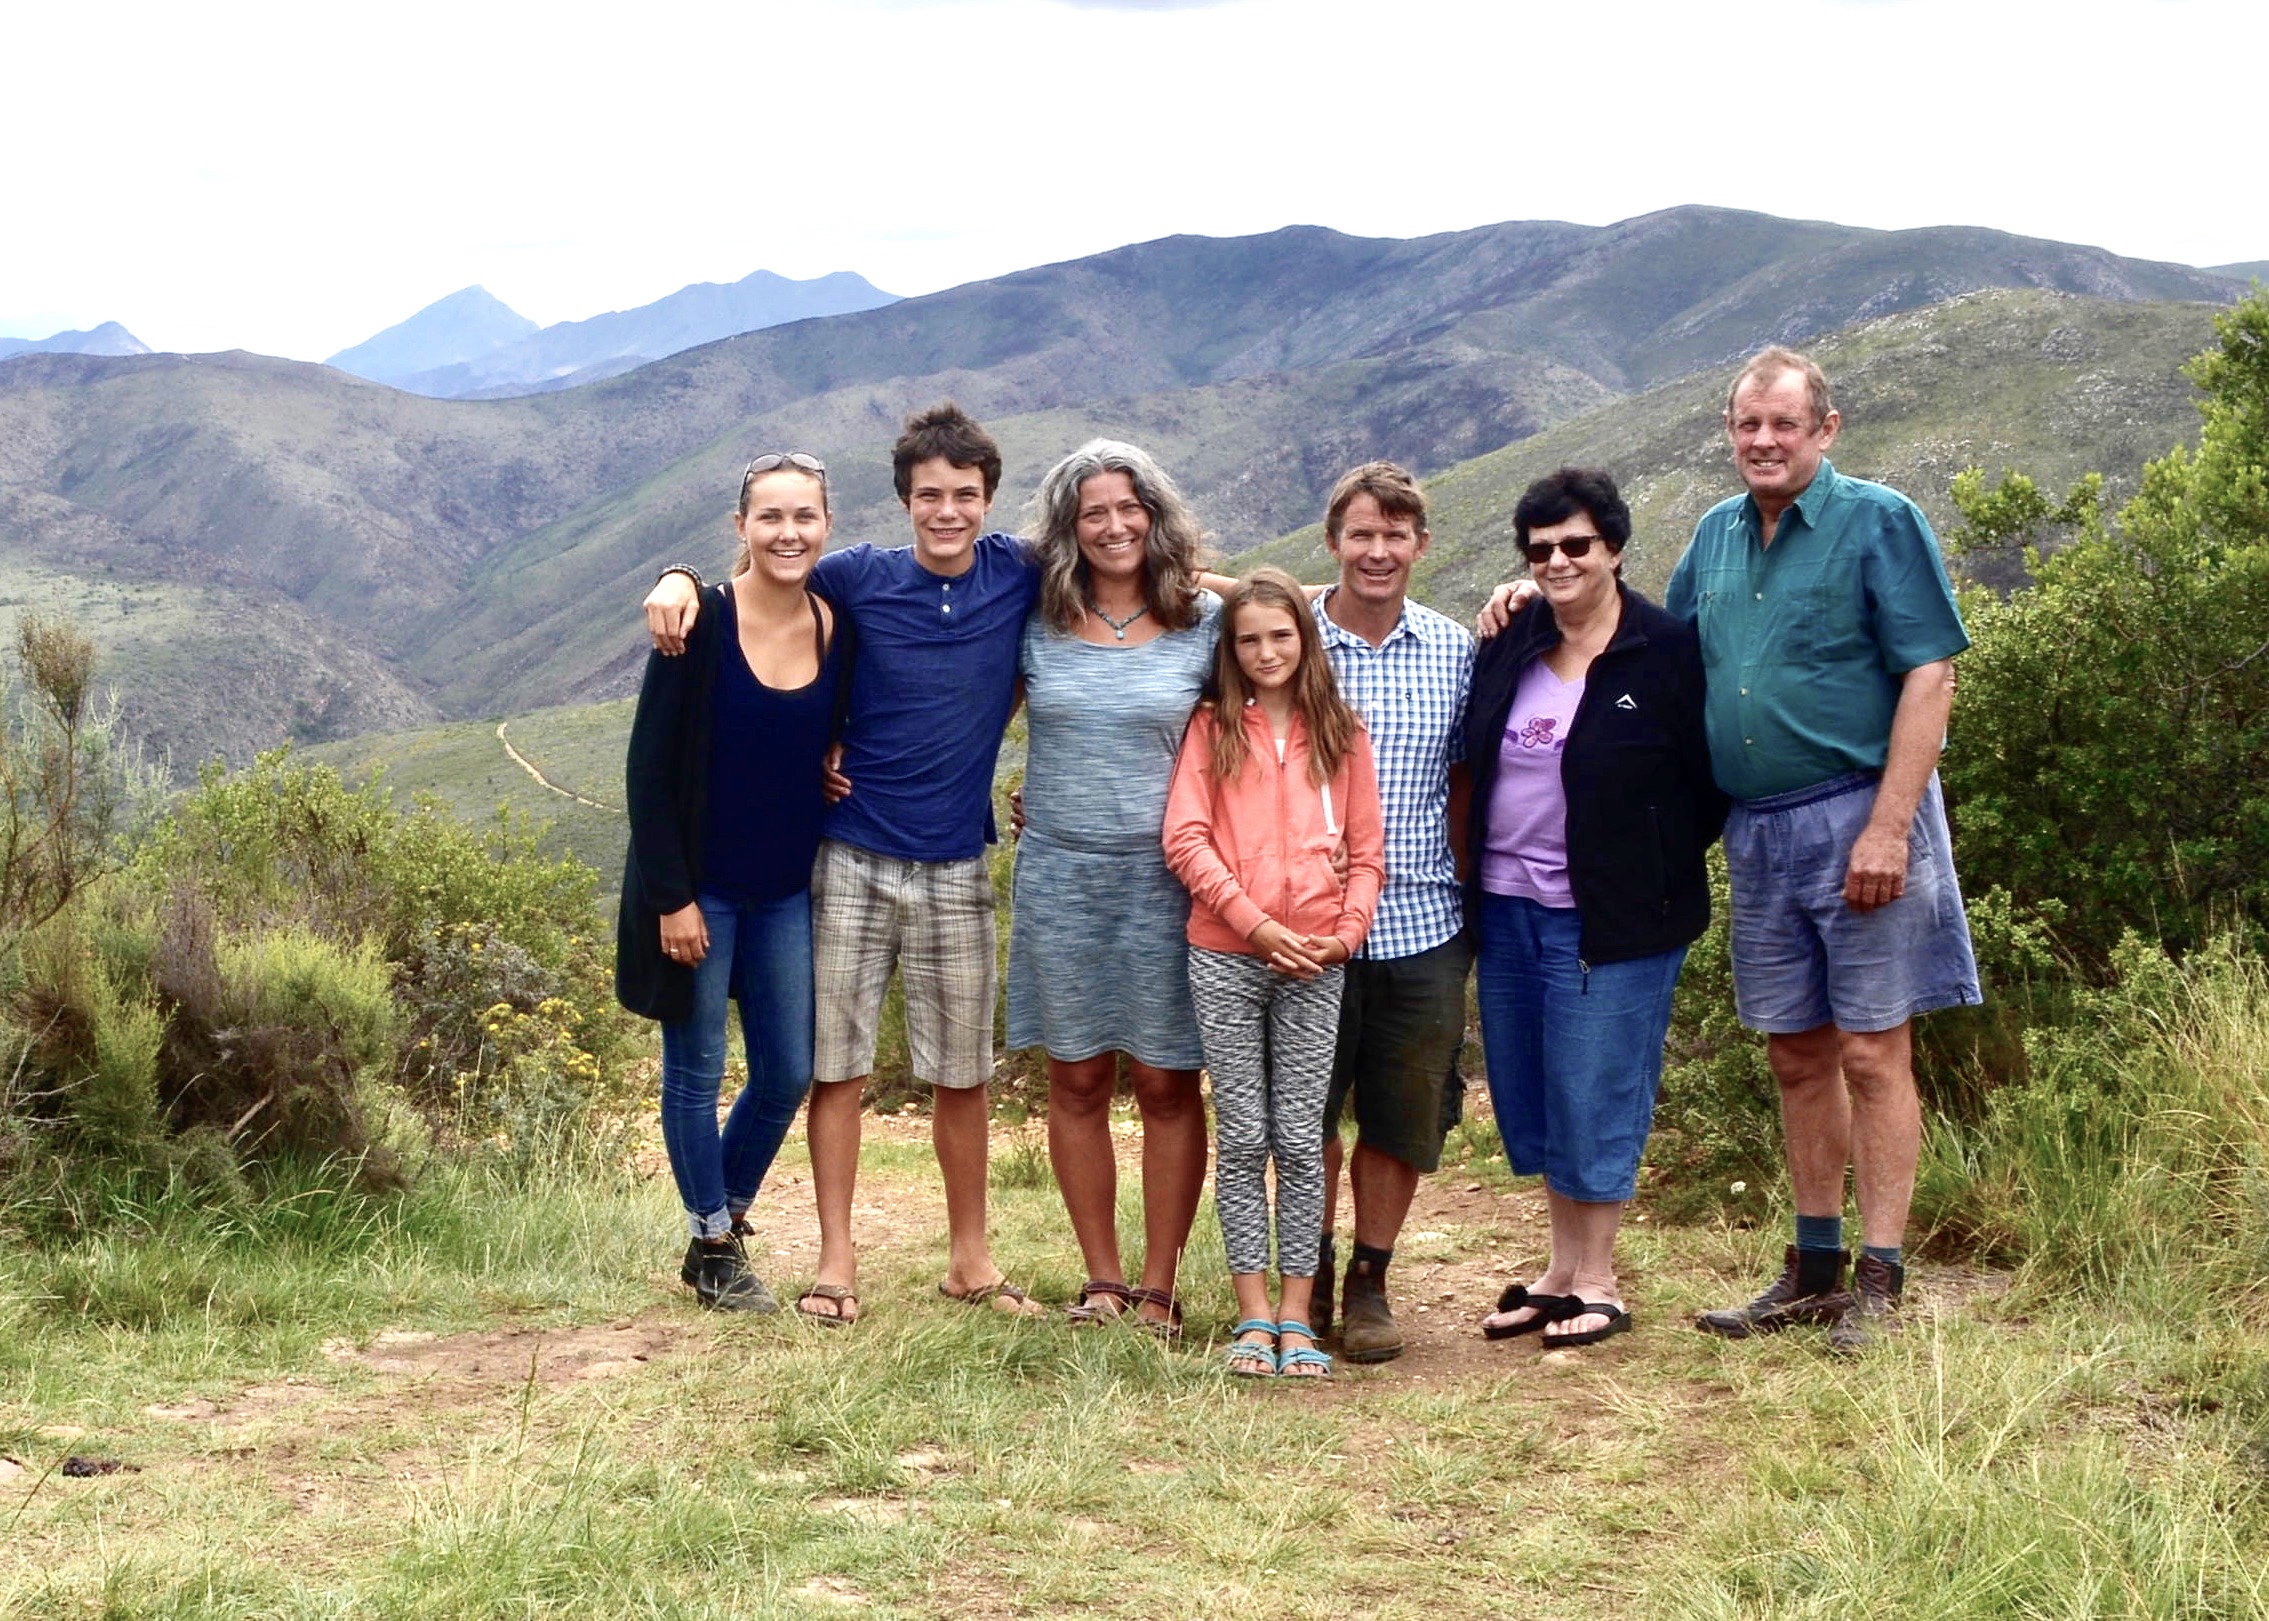 Harvey family with Wild Mountain Honeybush farmers in South Africa